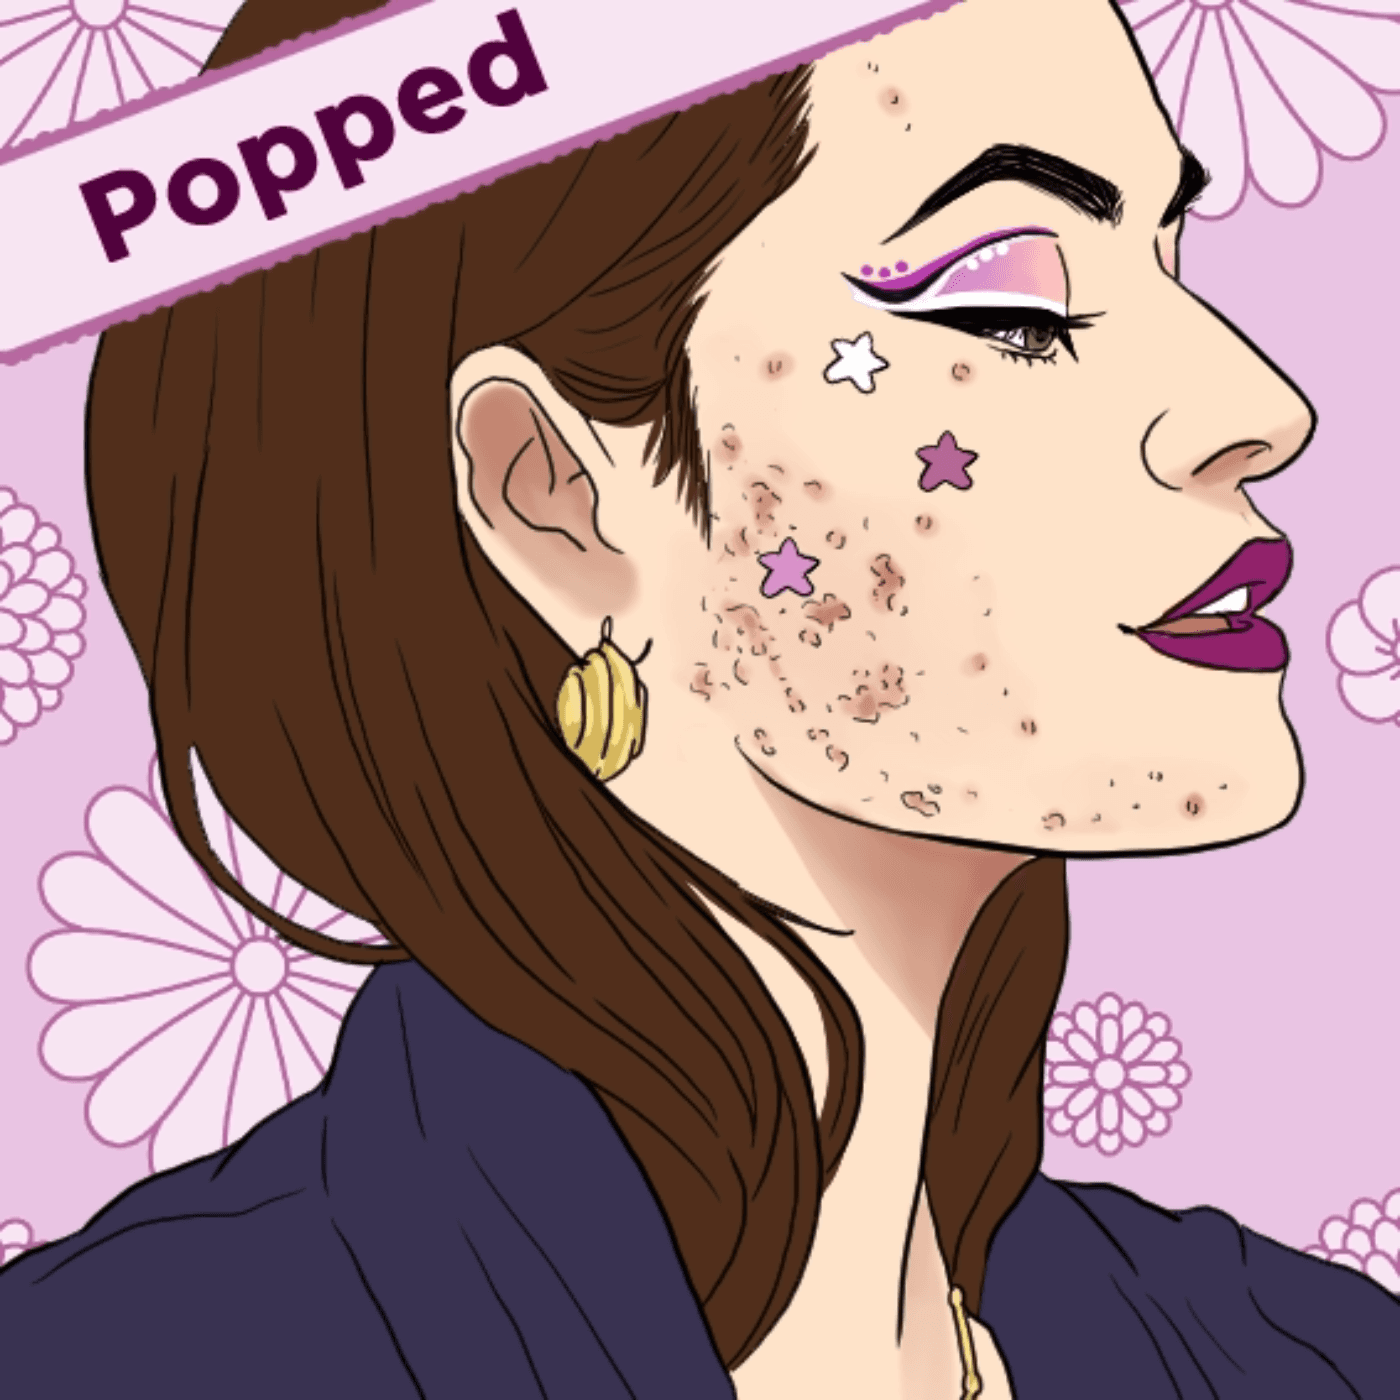 Thumbnail for "Popped: Adult Acne In The 'Perfect Skin' Era".